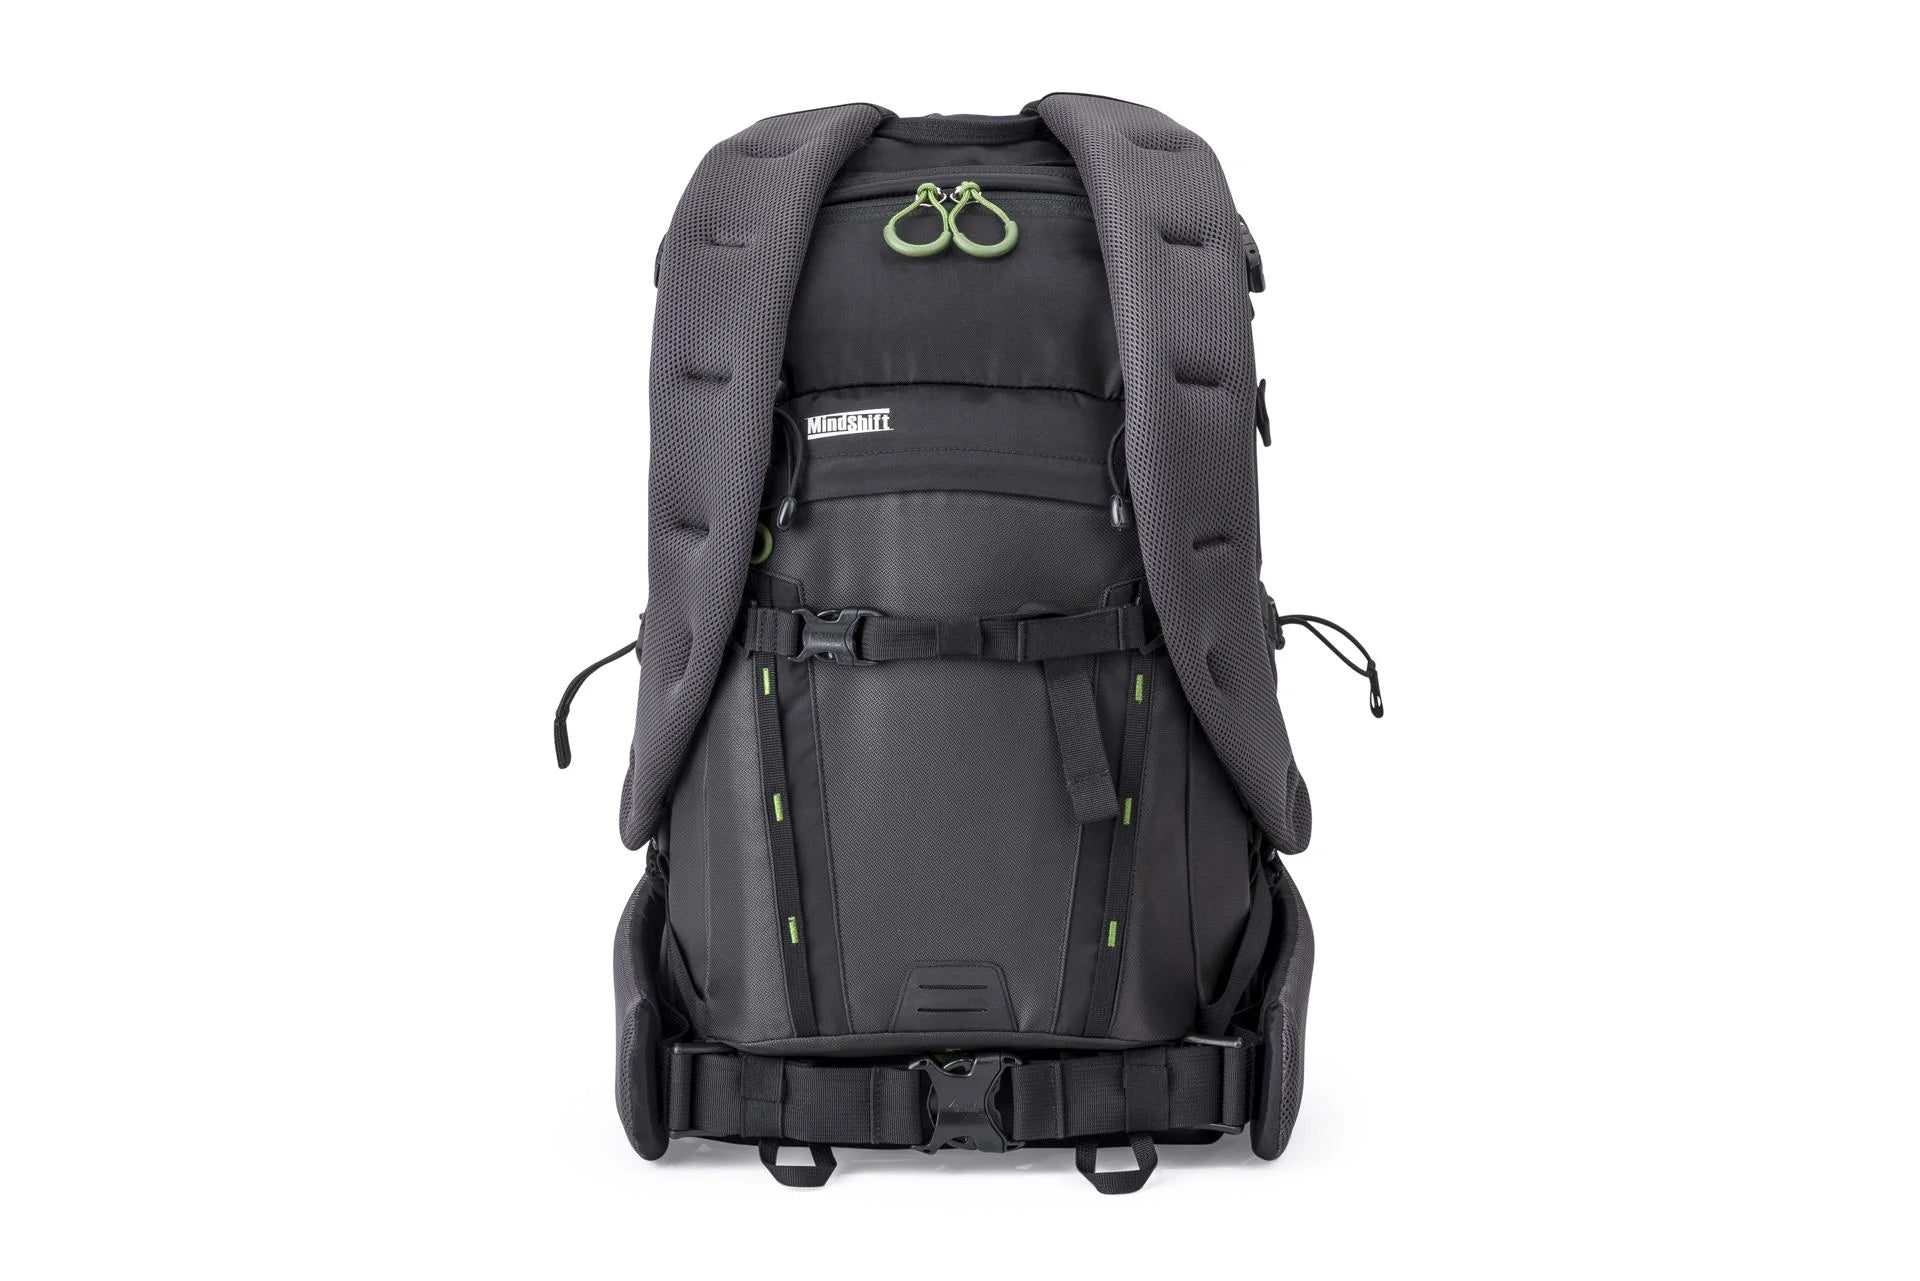 Mindshift Gear MSG360 BackLight 26L Photo Daypack - Charcoal